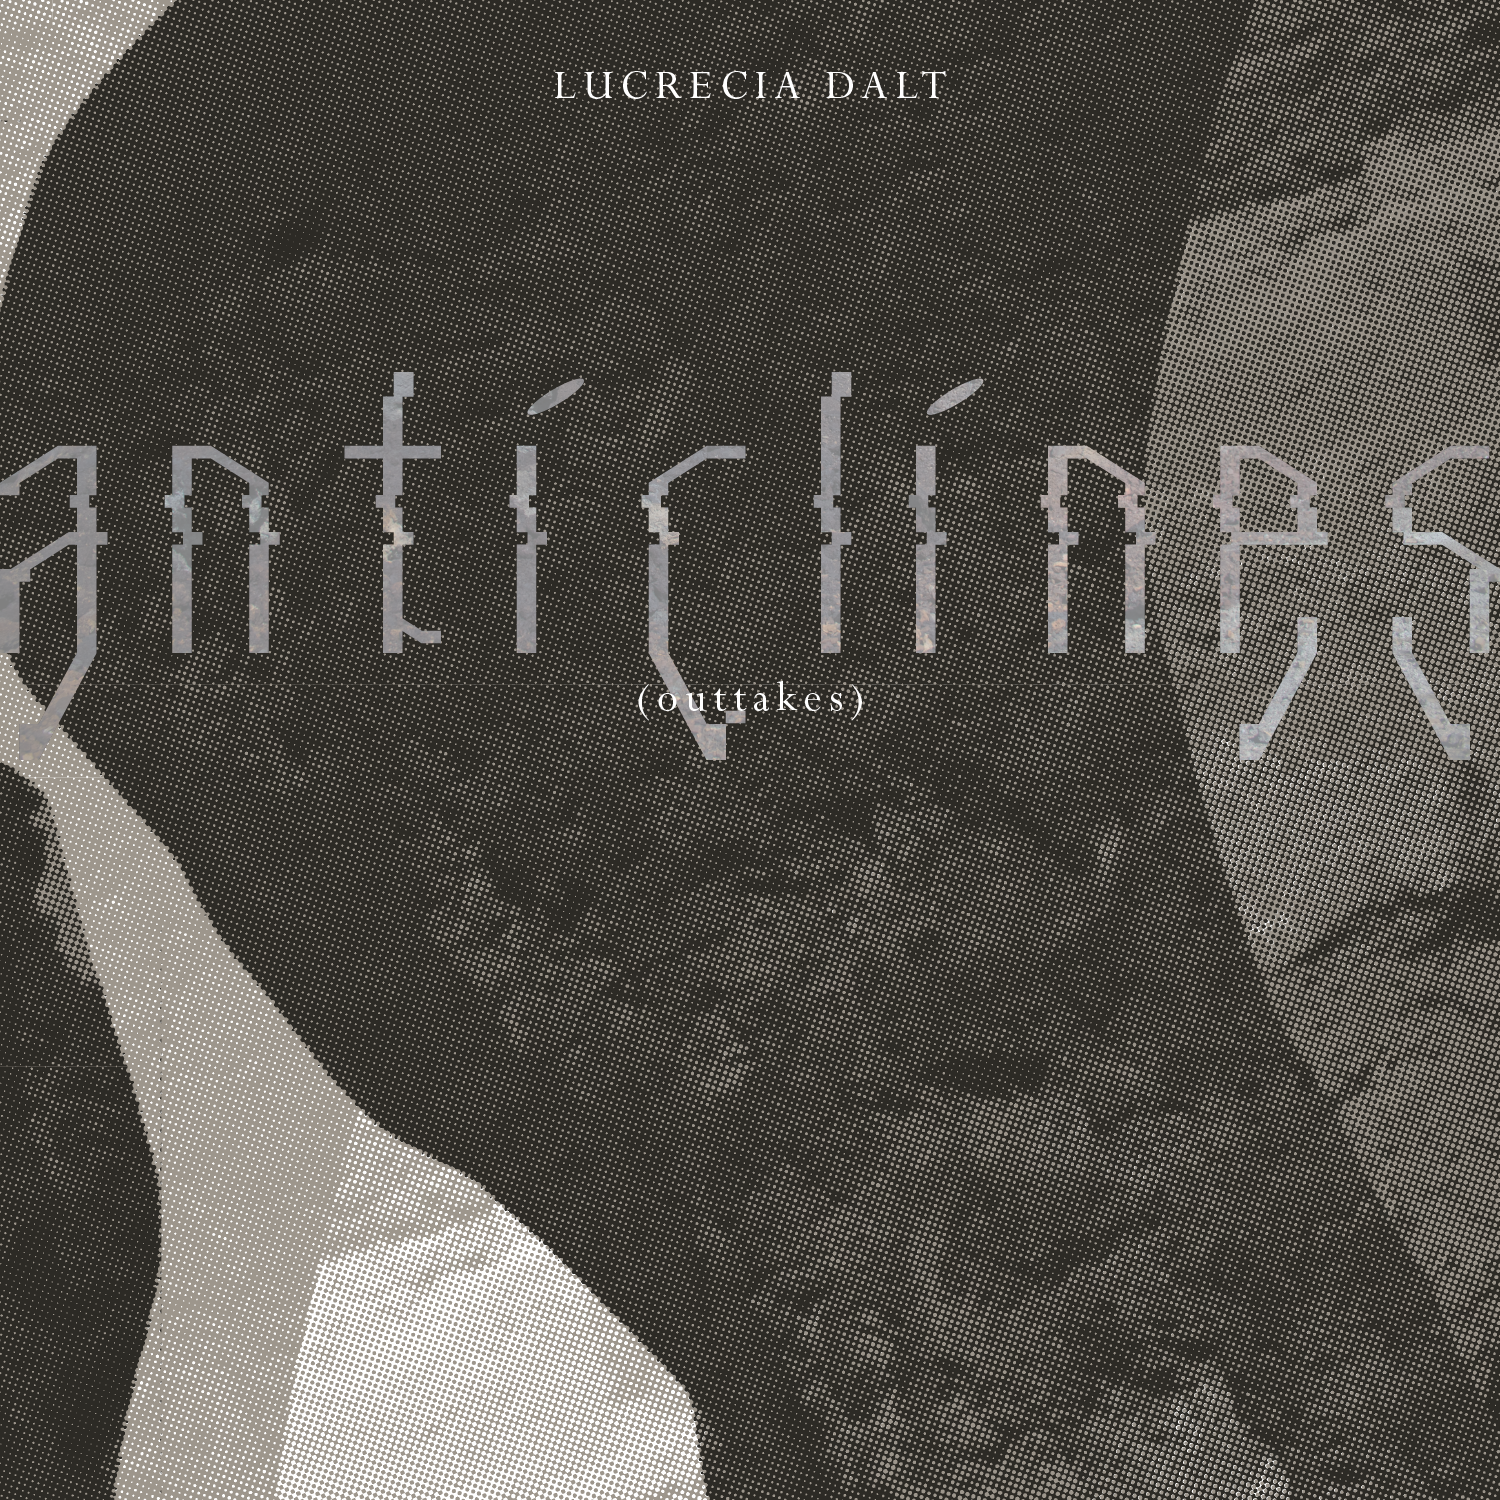 Image for Lucrecia Dalt – Anticlines Outtakes